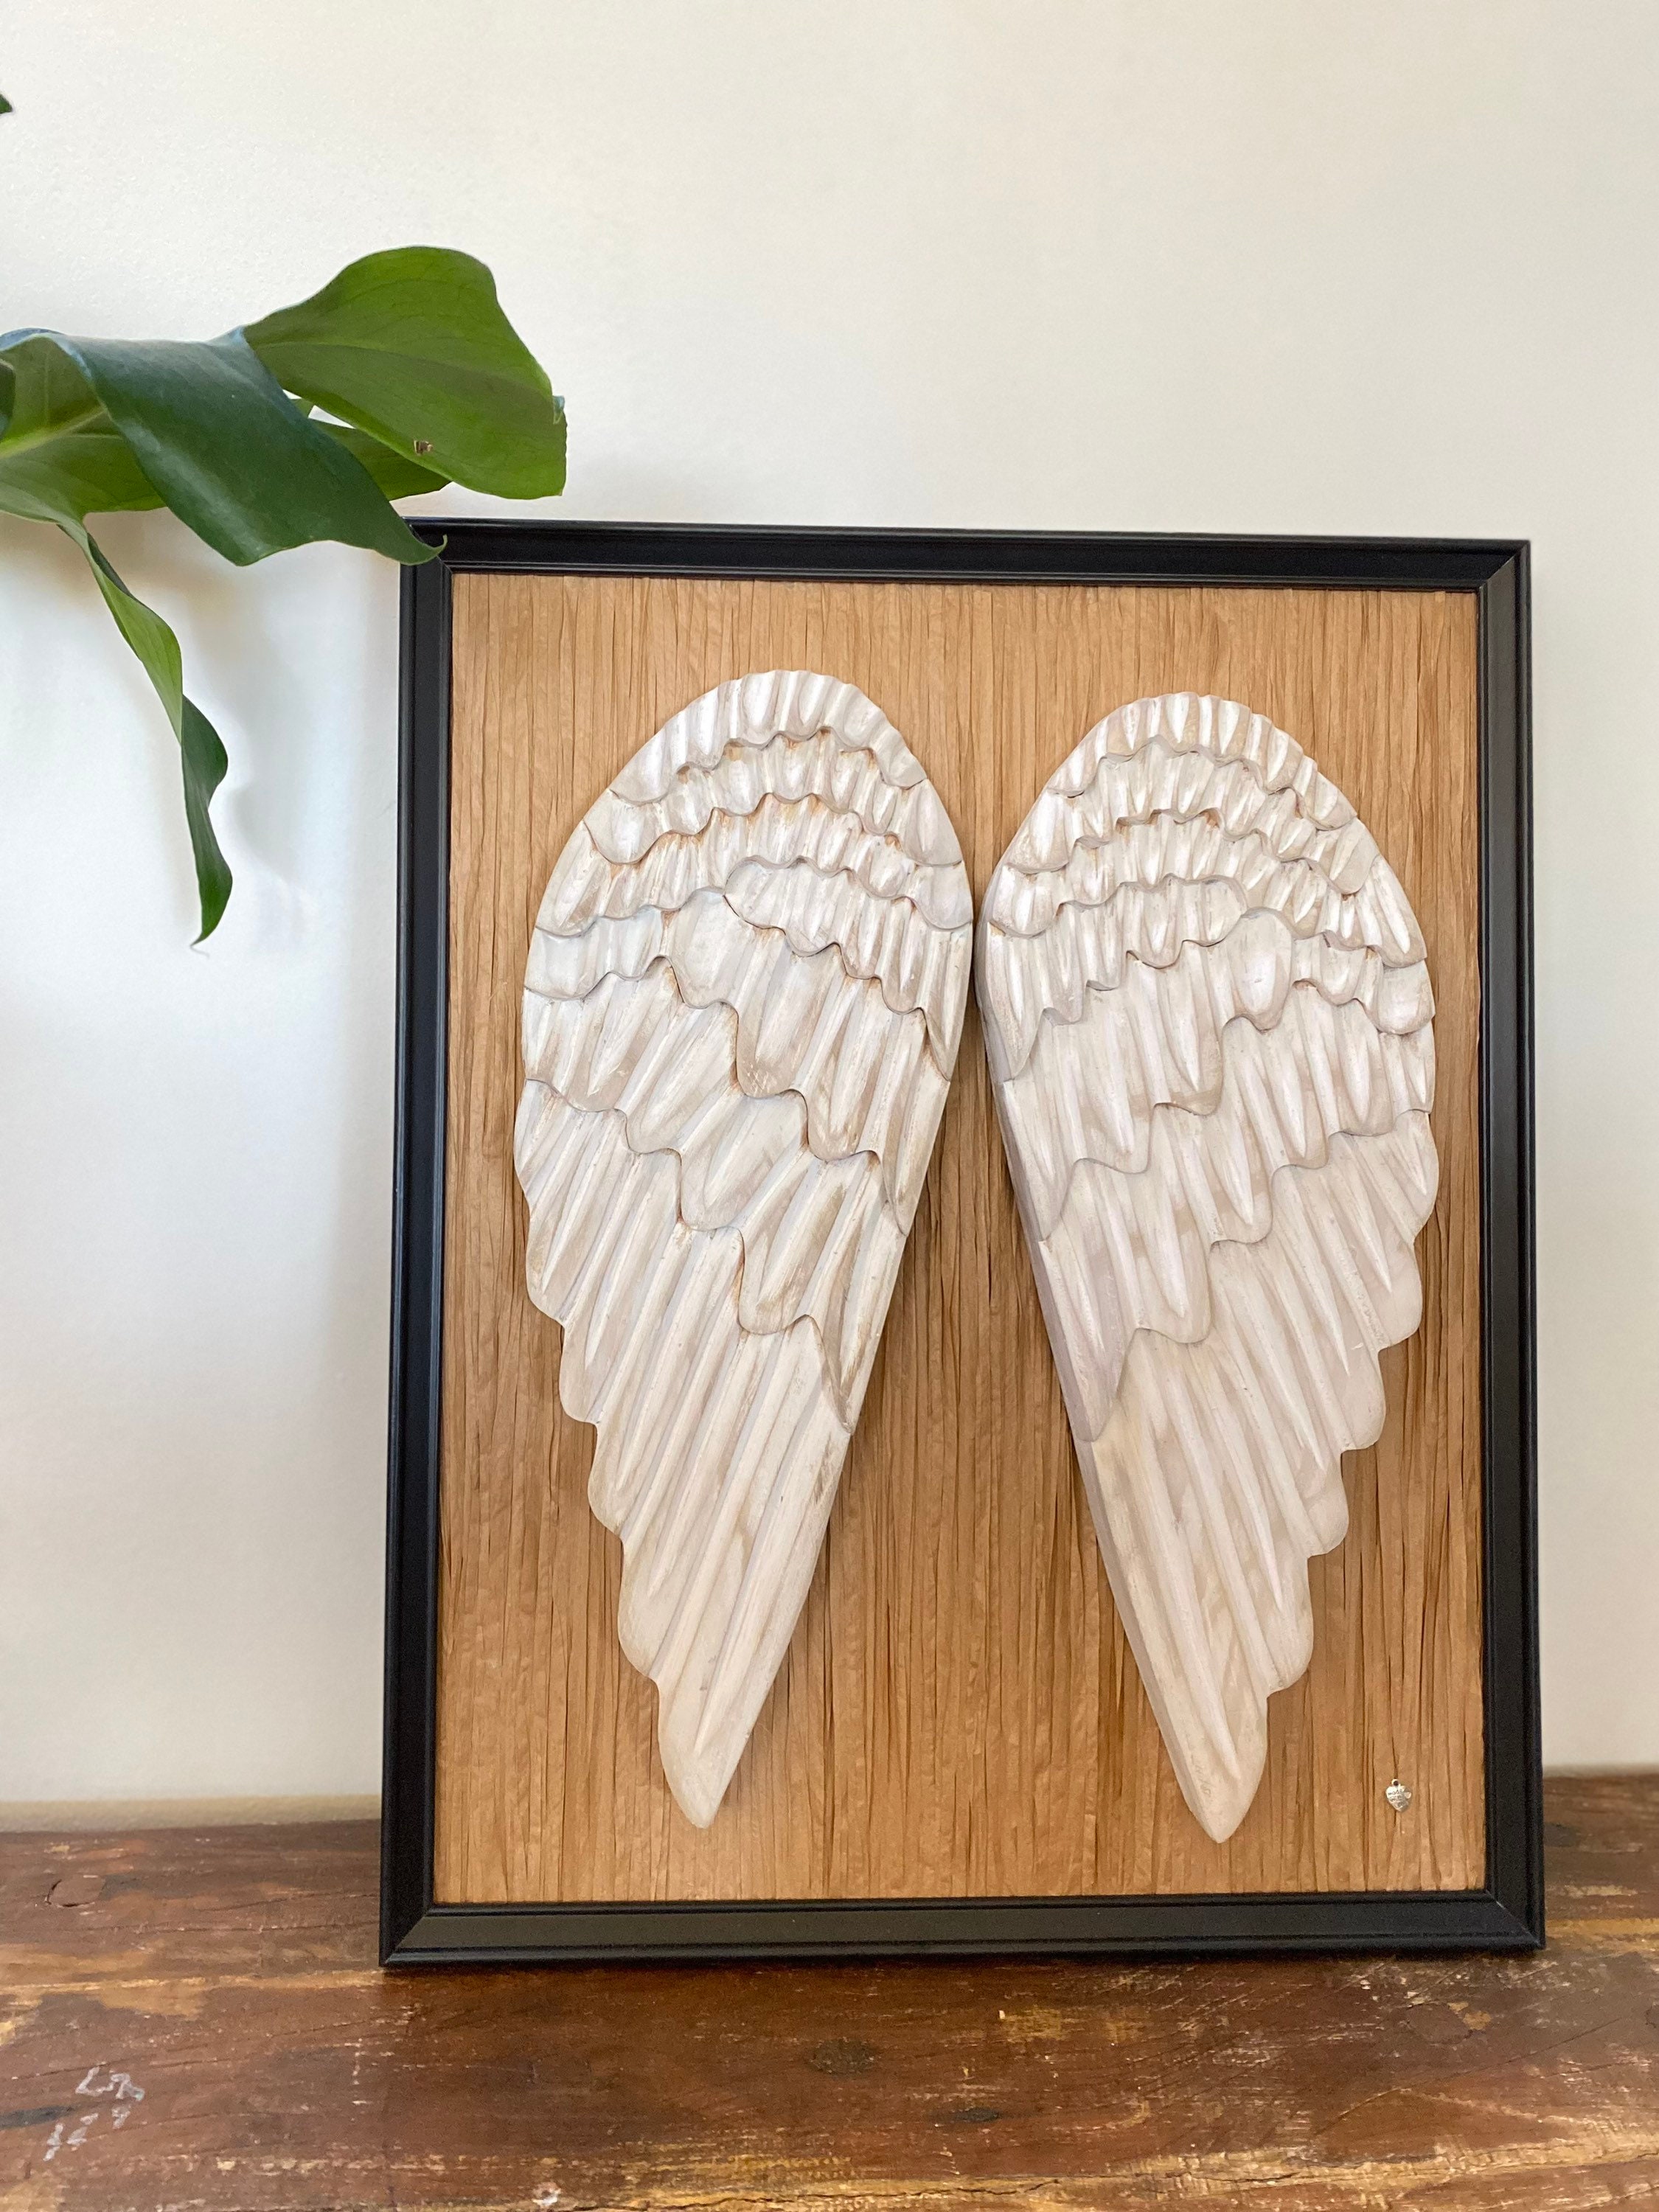 80pcs Angel Wings Wooden Patches Christmas Decorations Angel Wings Shape  Wood Slices No Hole Wood Chips